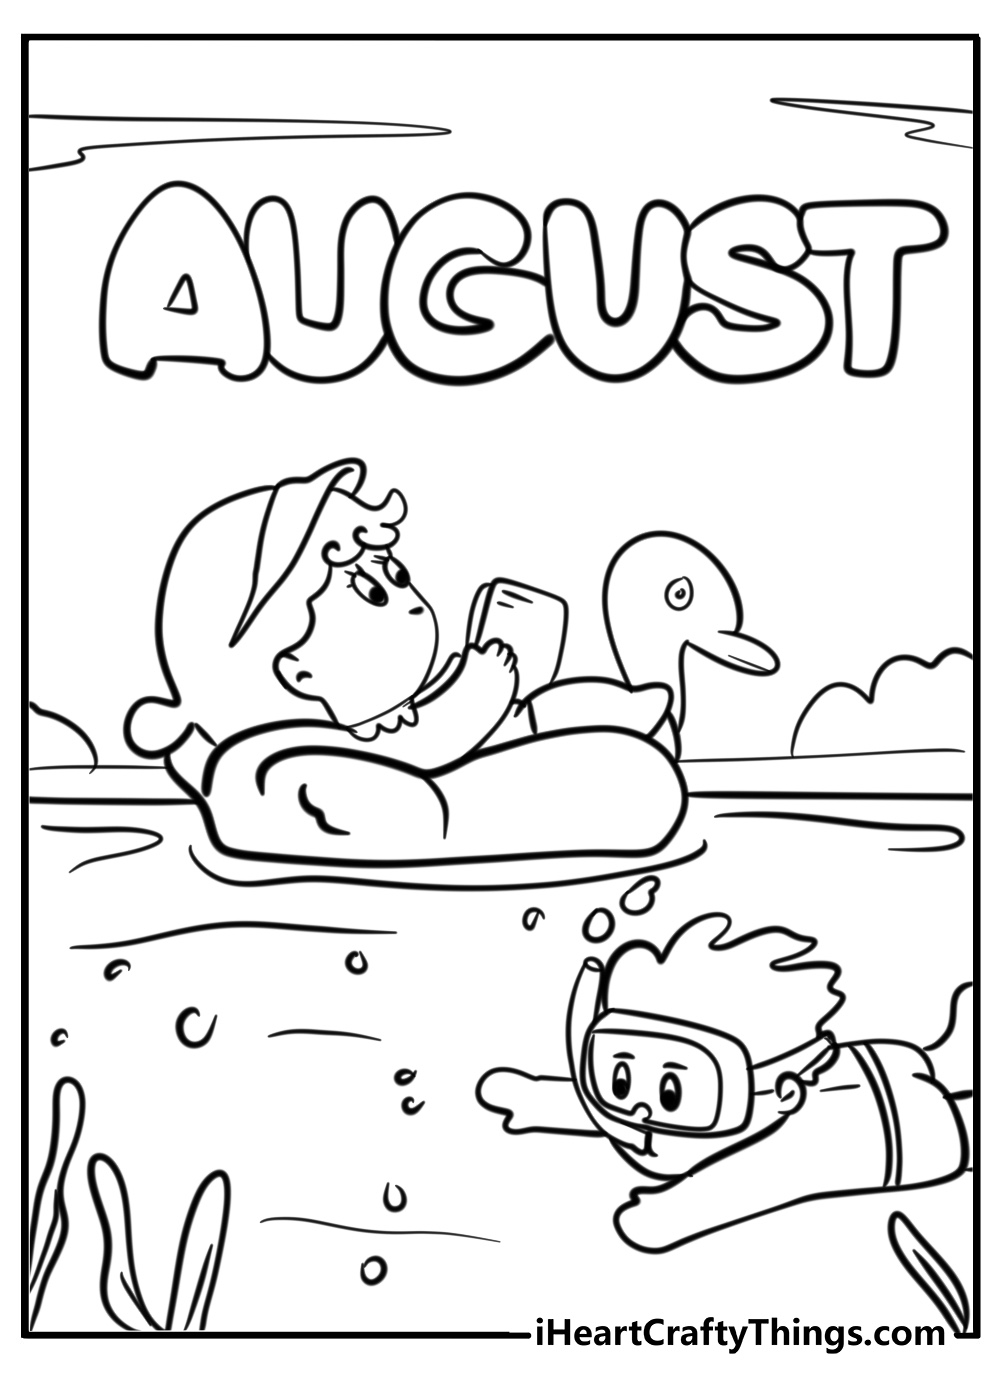 Summer fun in august coloring page